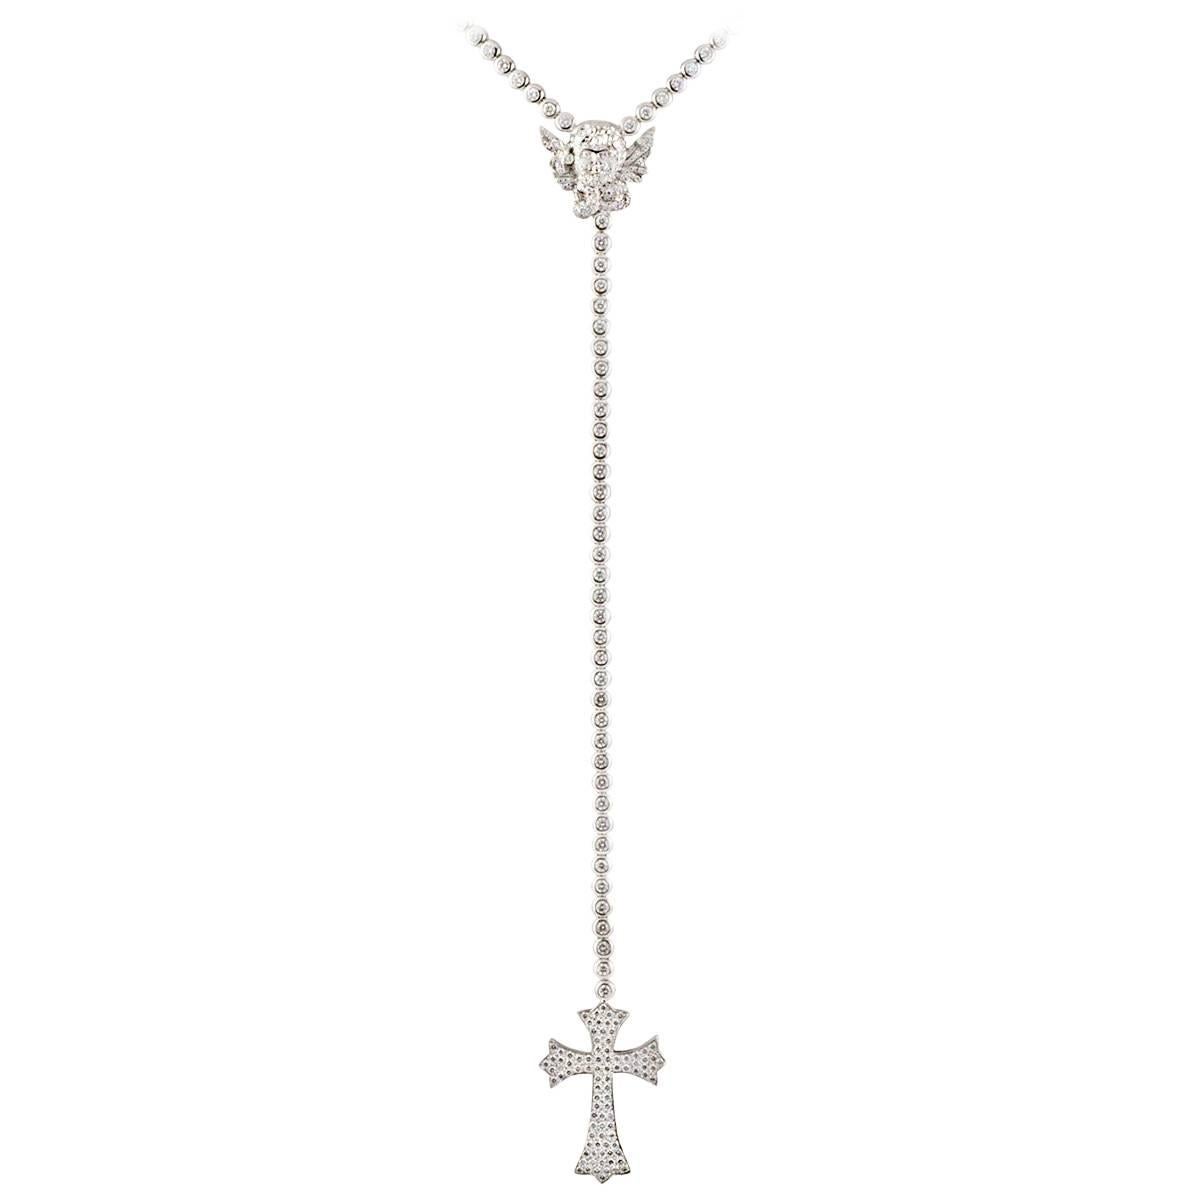 An 18k white gold diamond set necklace by Edouard Nahum. The necklace is set to the centre with an angel motif, pave set with 144 round brilliant cut diamonds. Suspending from the angel is a freely moving chain made up of 38 round brilliant cut